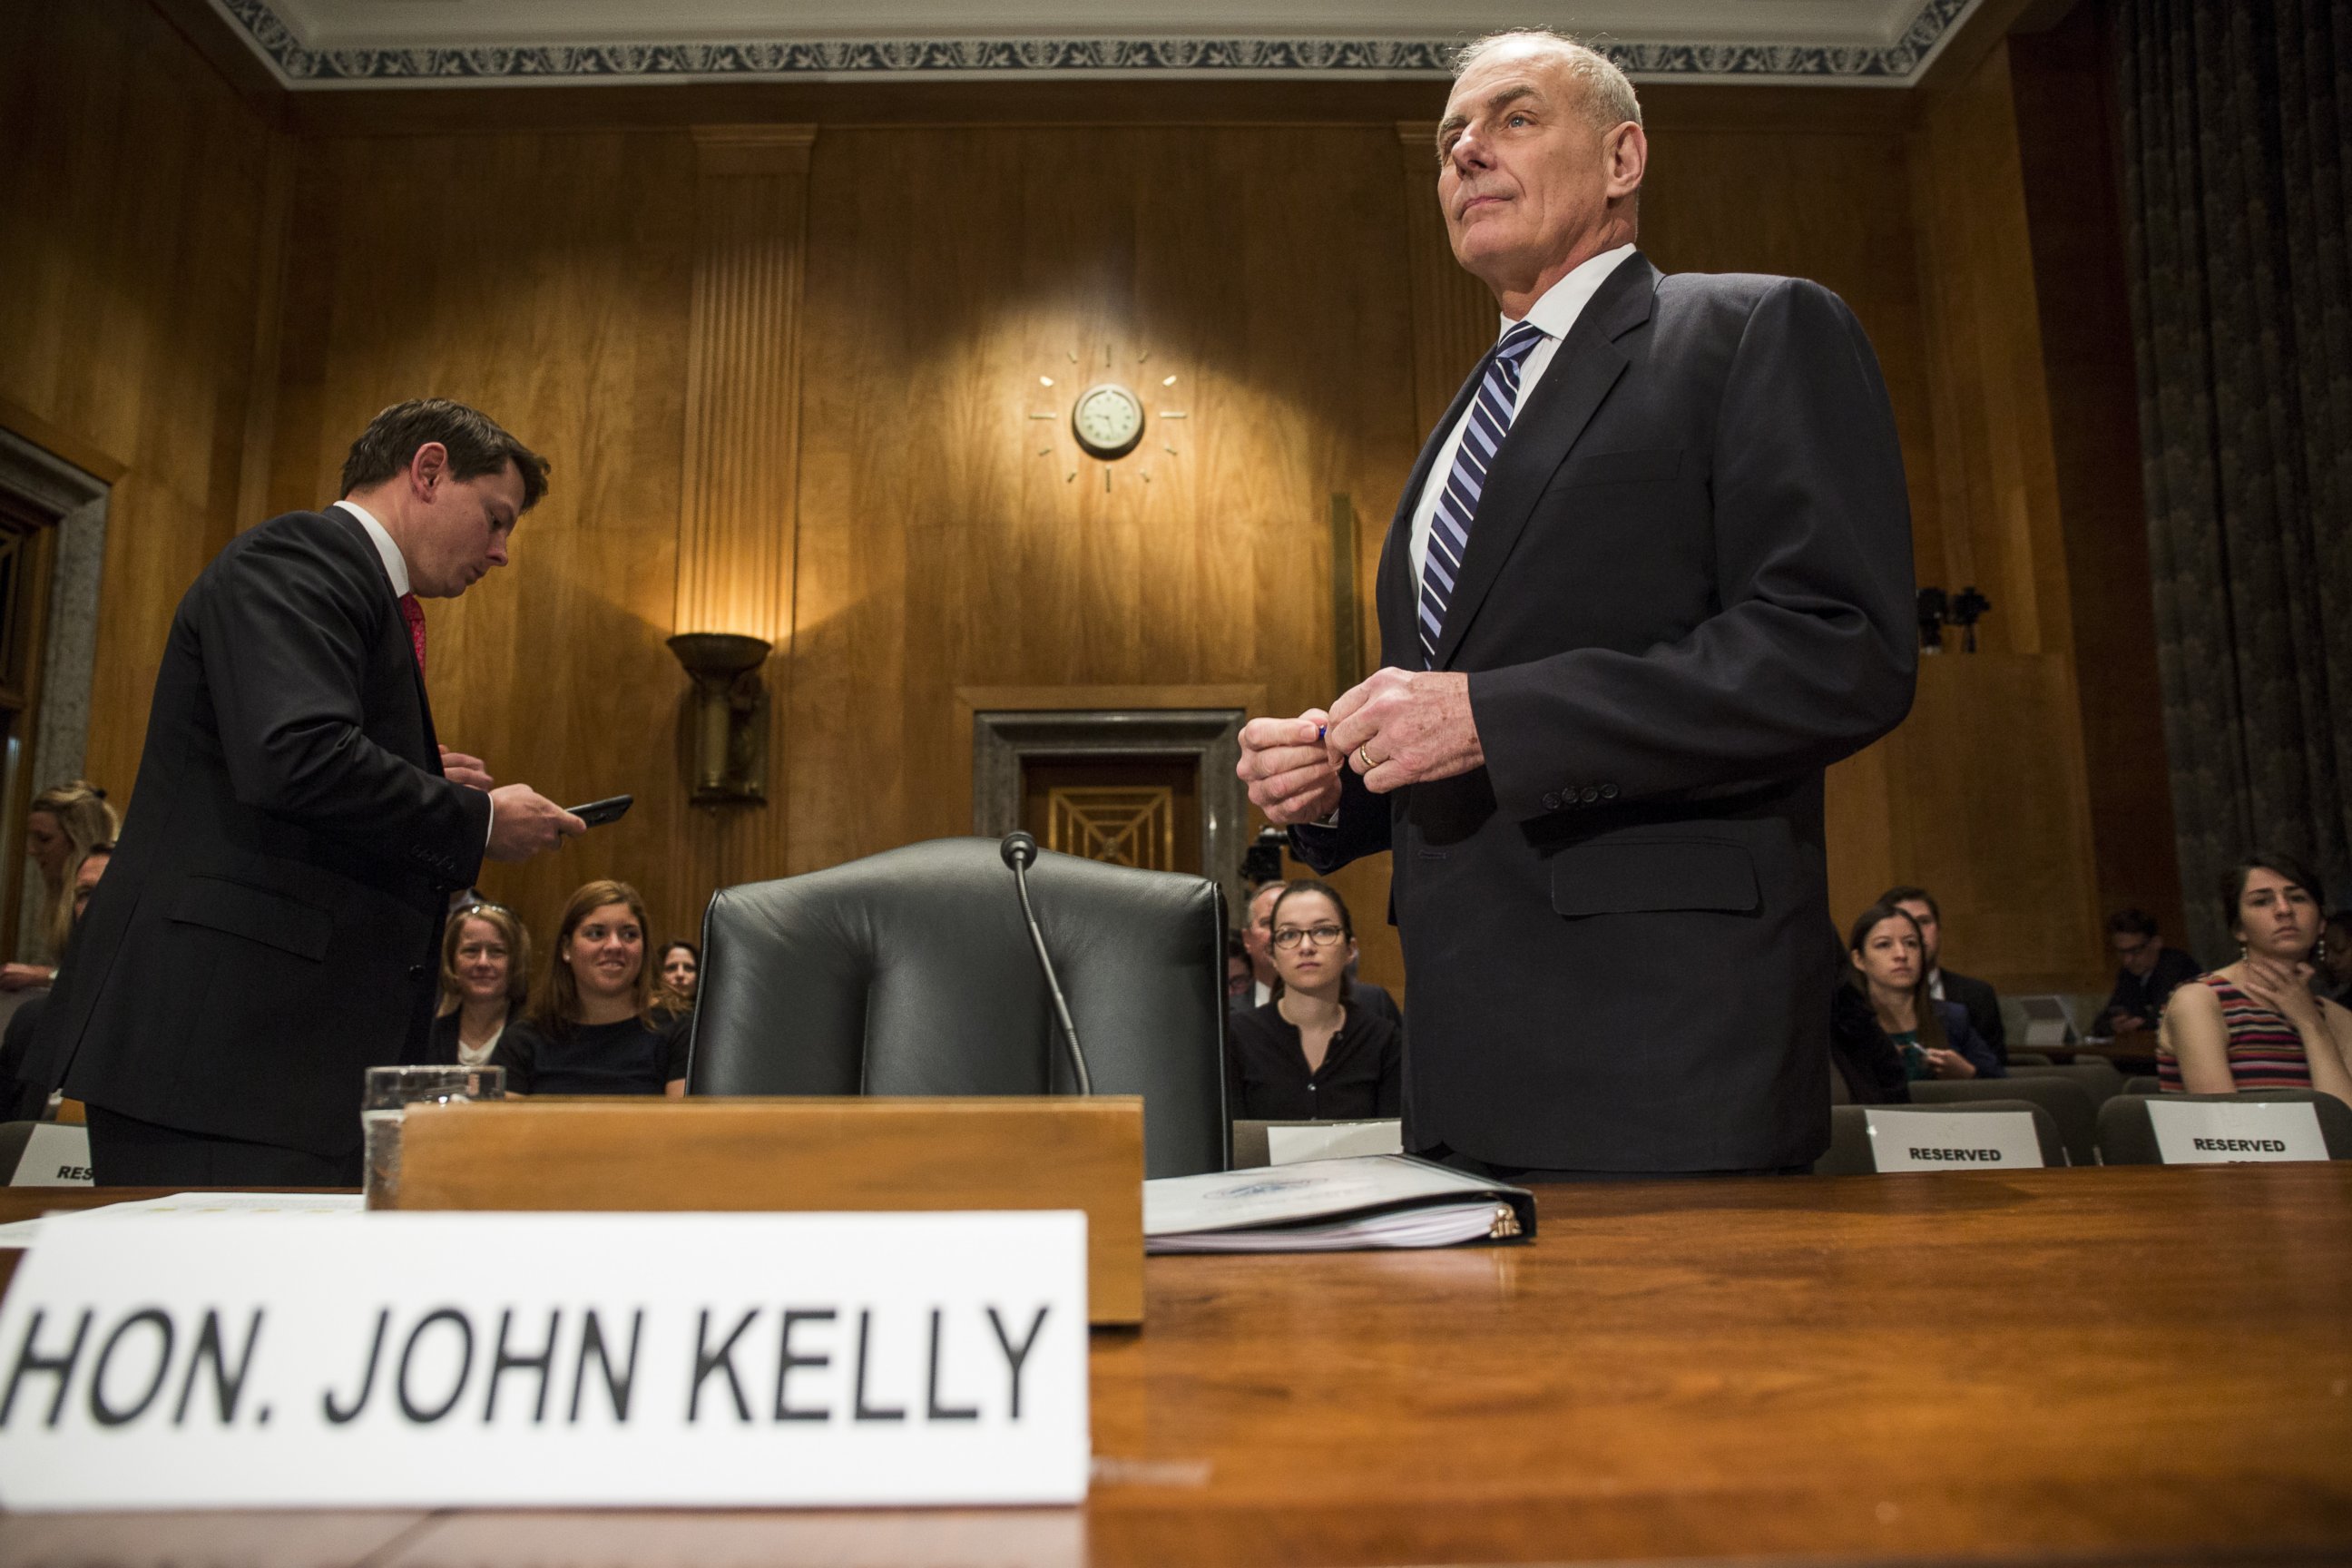 PHOTO: Secretary of Homeland Security John Kelly arrives before testifying during a Senate Homeland Security Committee hearing on April 5, 2017 on Capitol Hill in Washington, D.C.